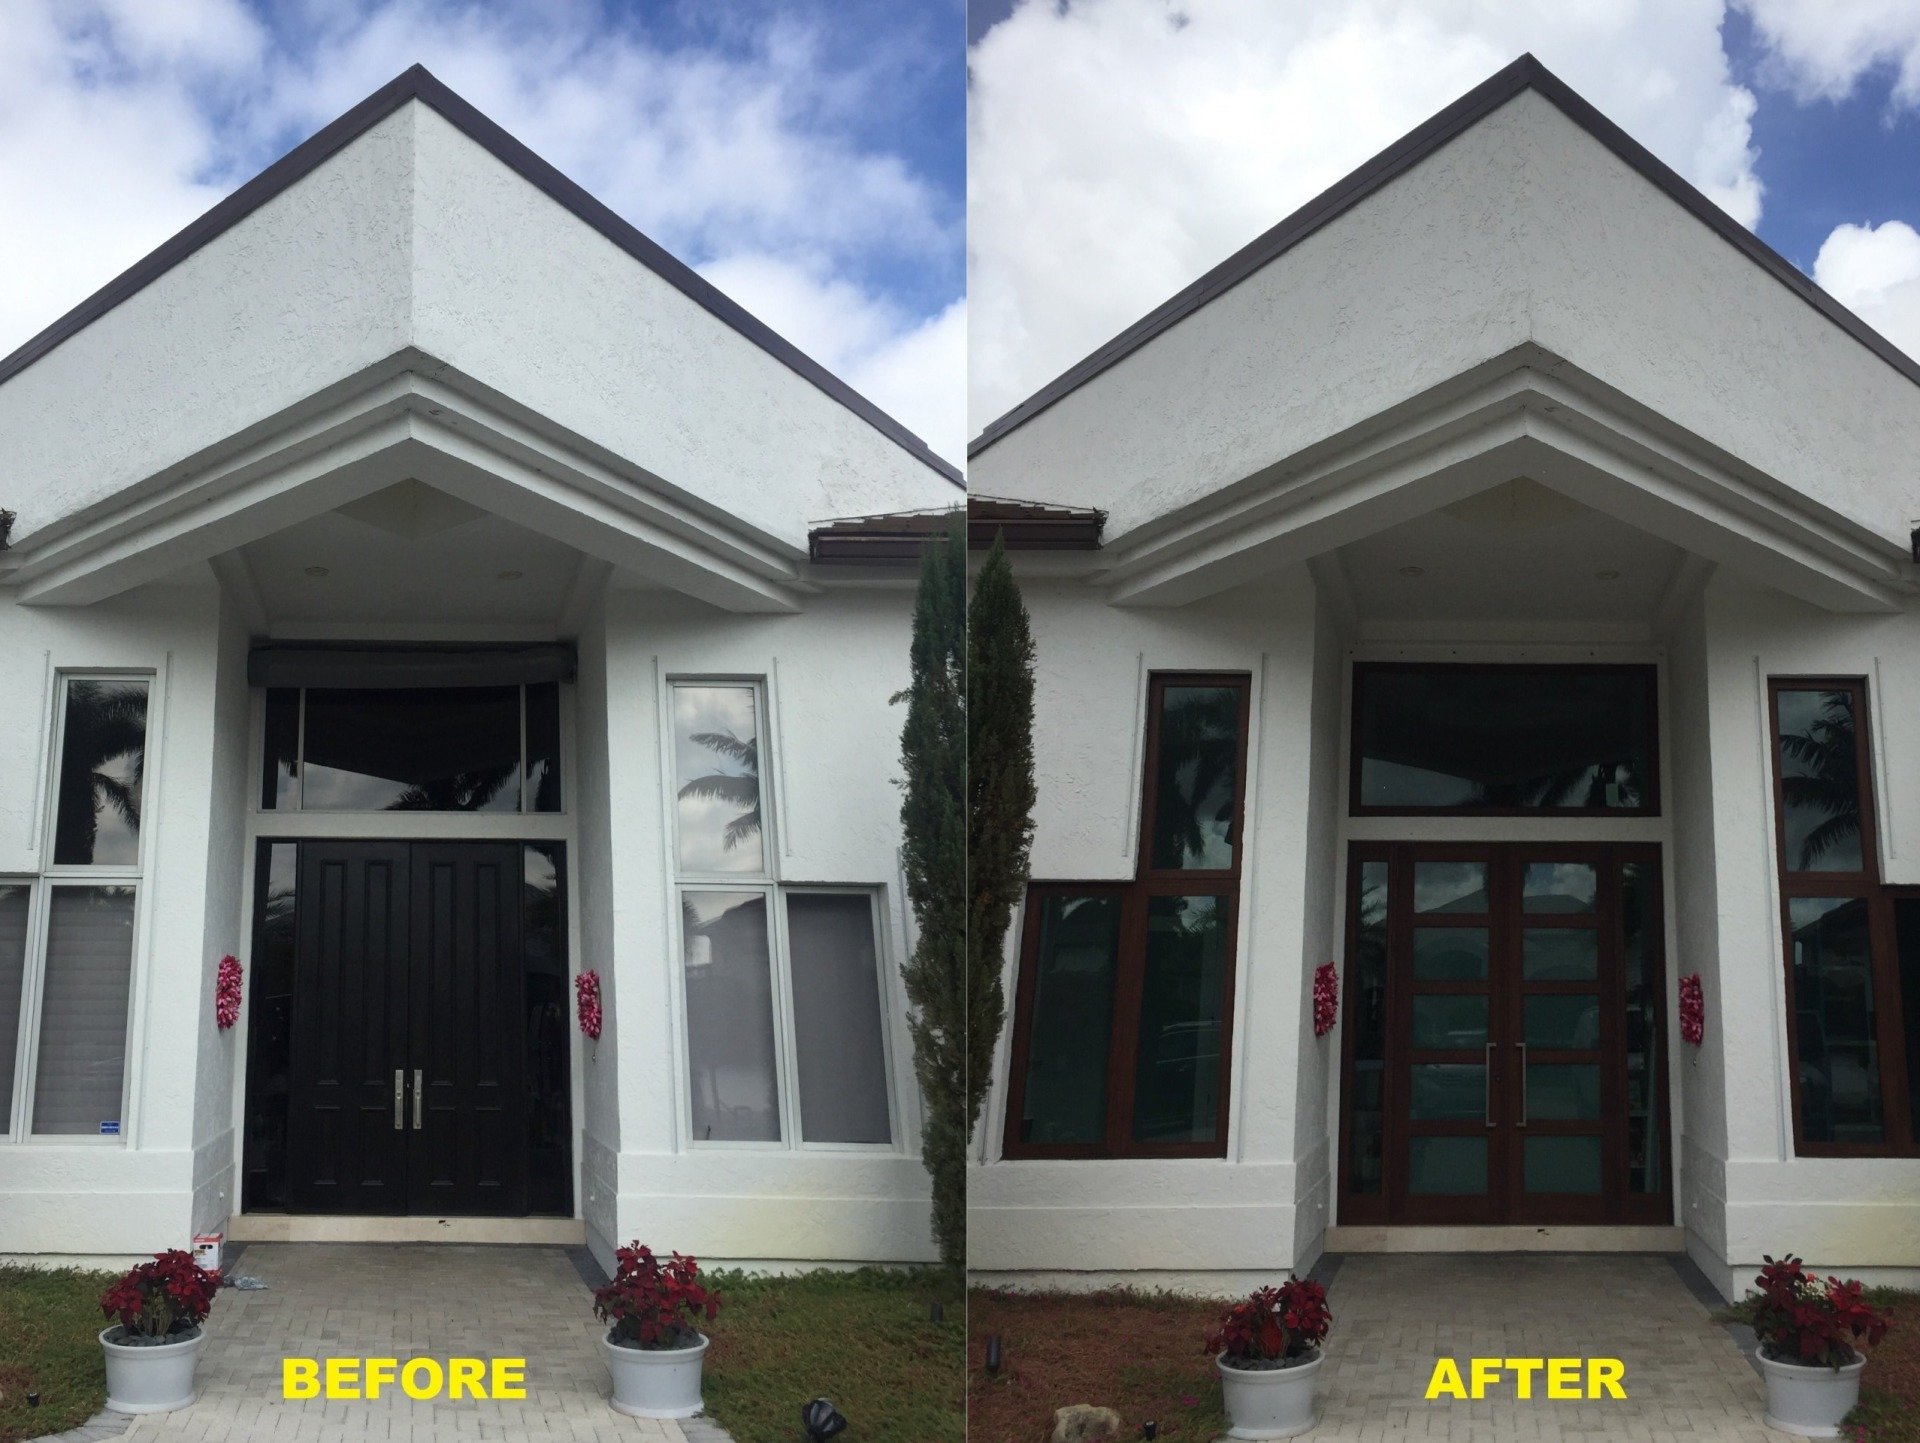 Hurricane Impact Windows Before and After